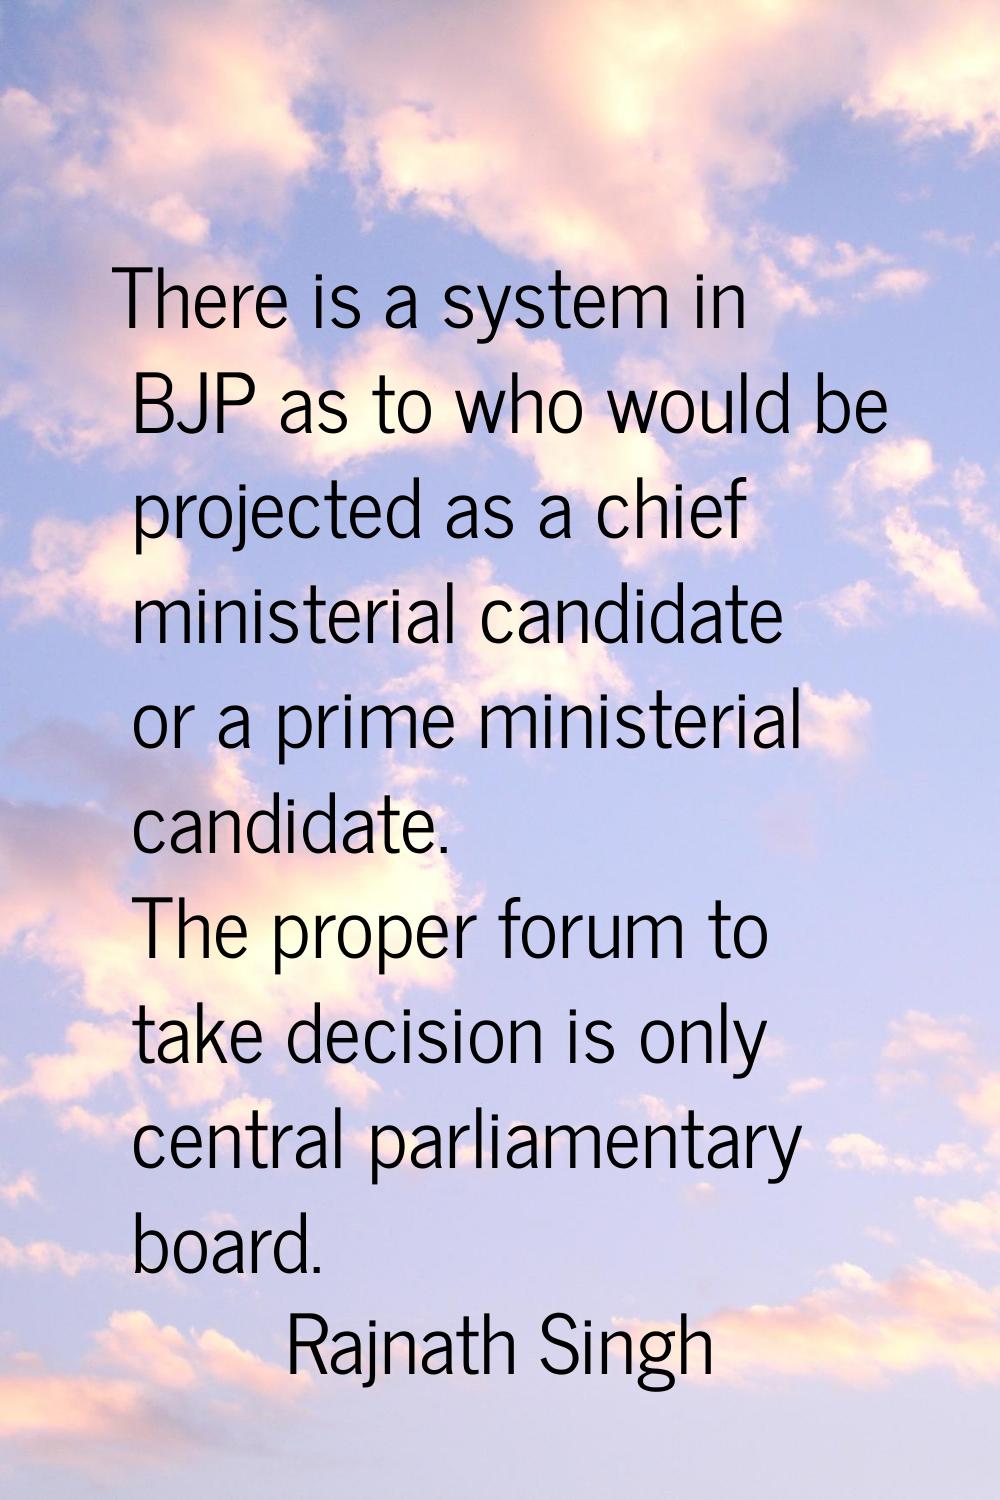 There is a system in BJP as to who would be projected as a chief ministerial candidate or a prime m